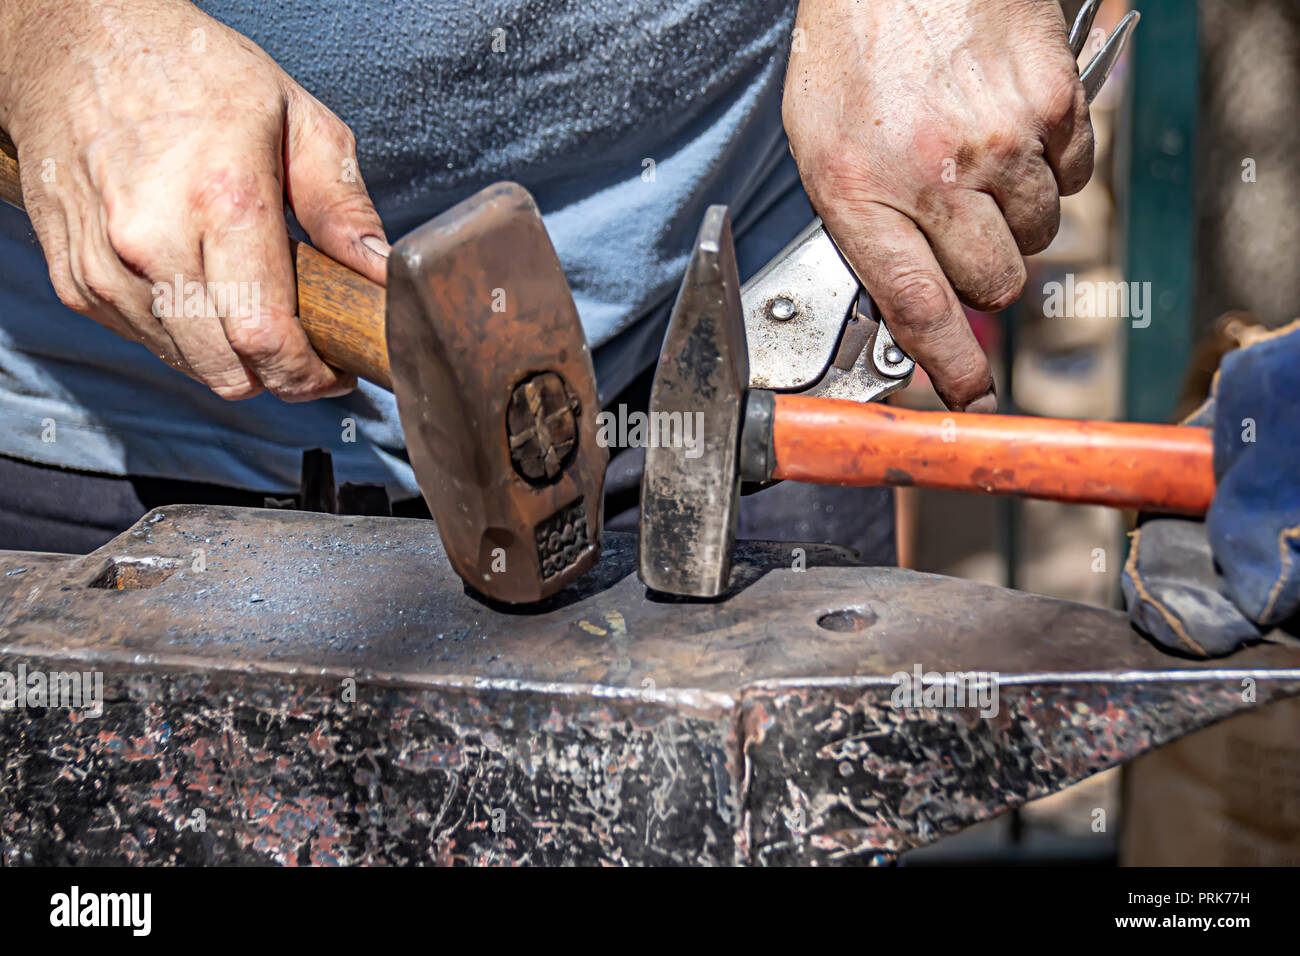 The hands of blacksmiths with hammers Stock Photo